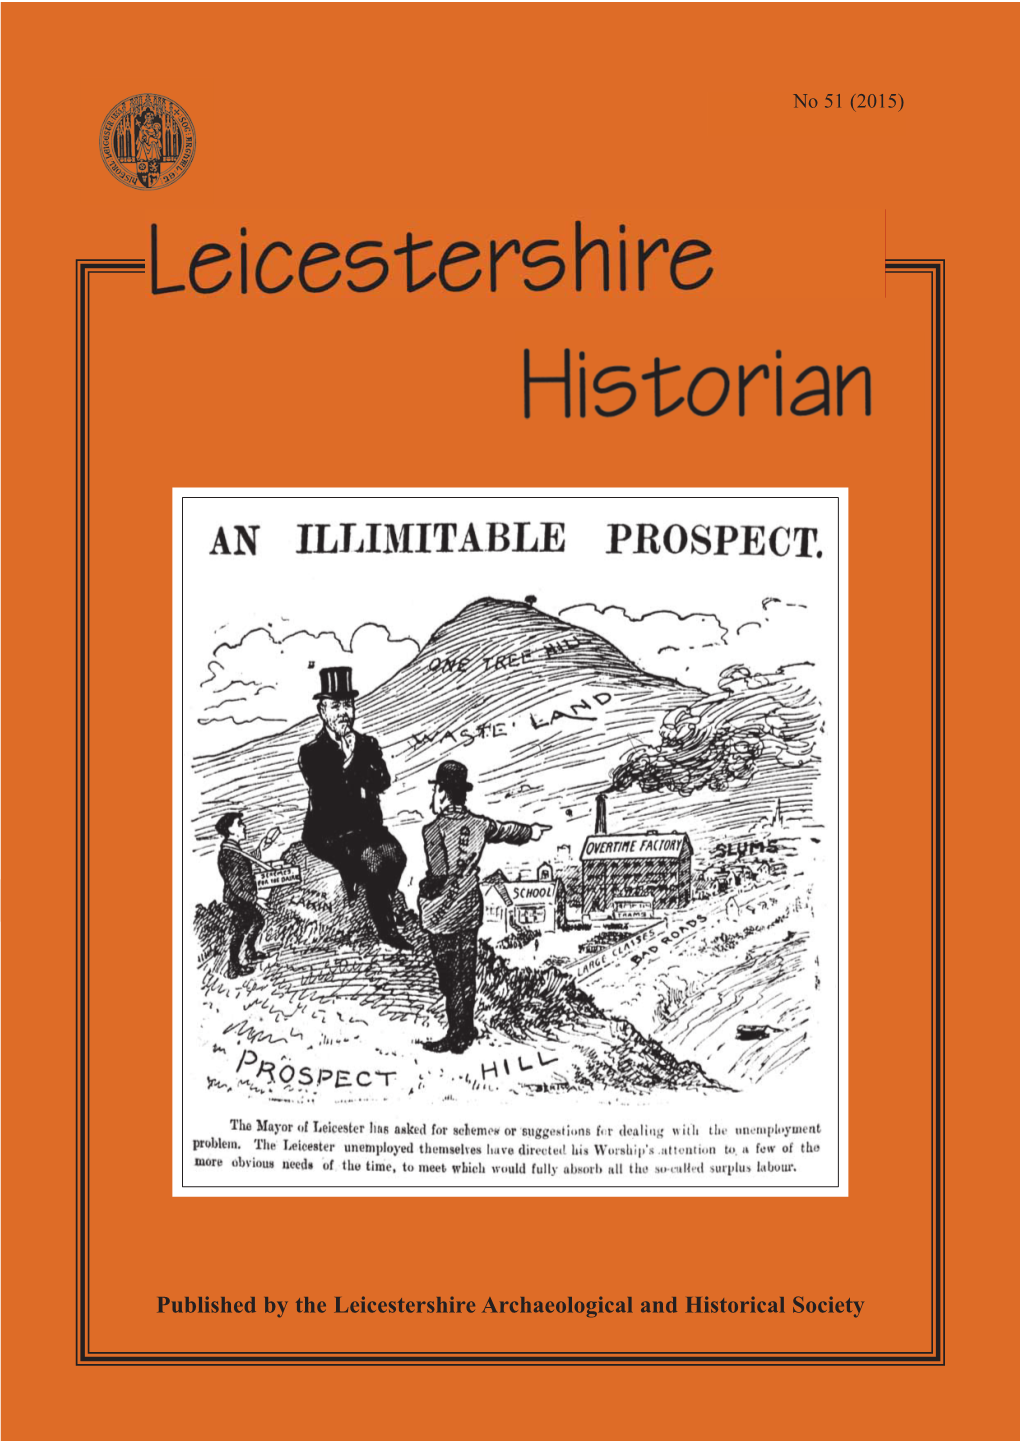 Download the 2015 Leicestershire Historian